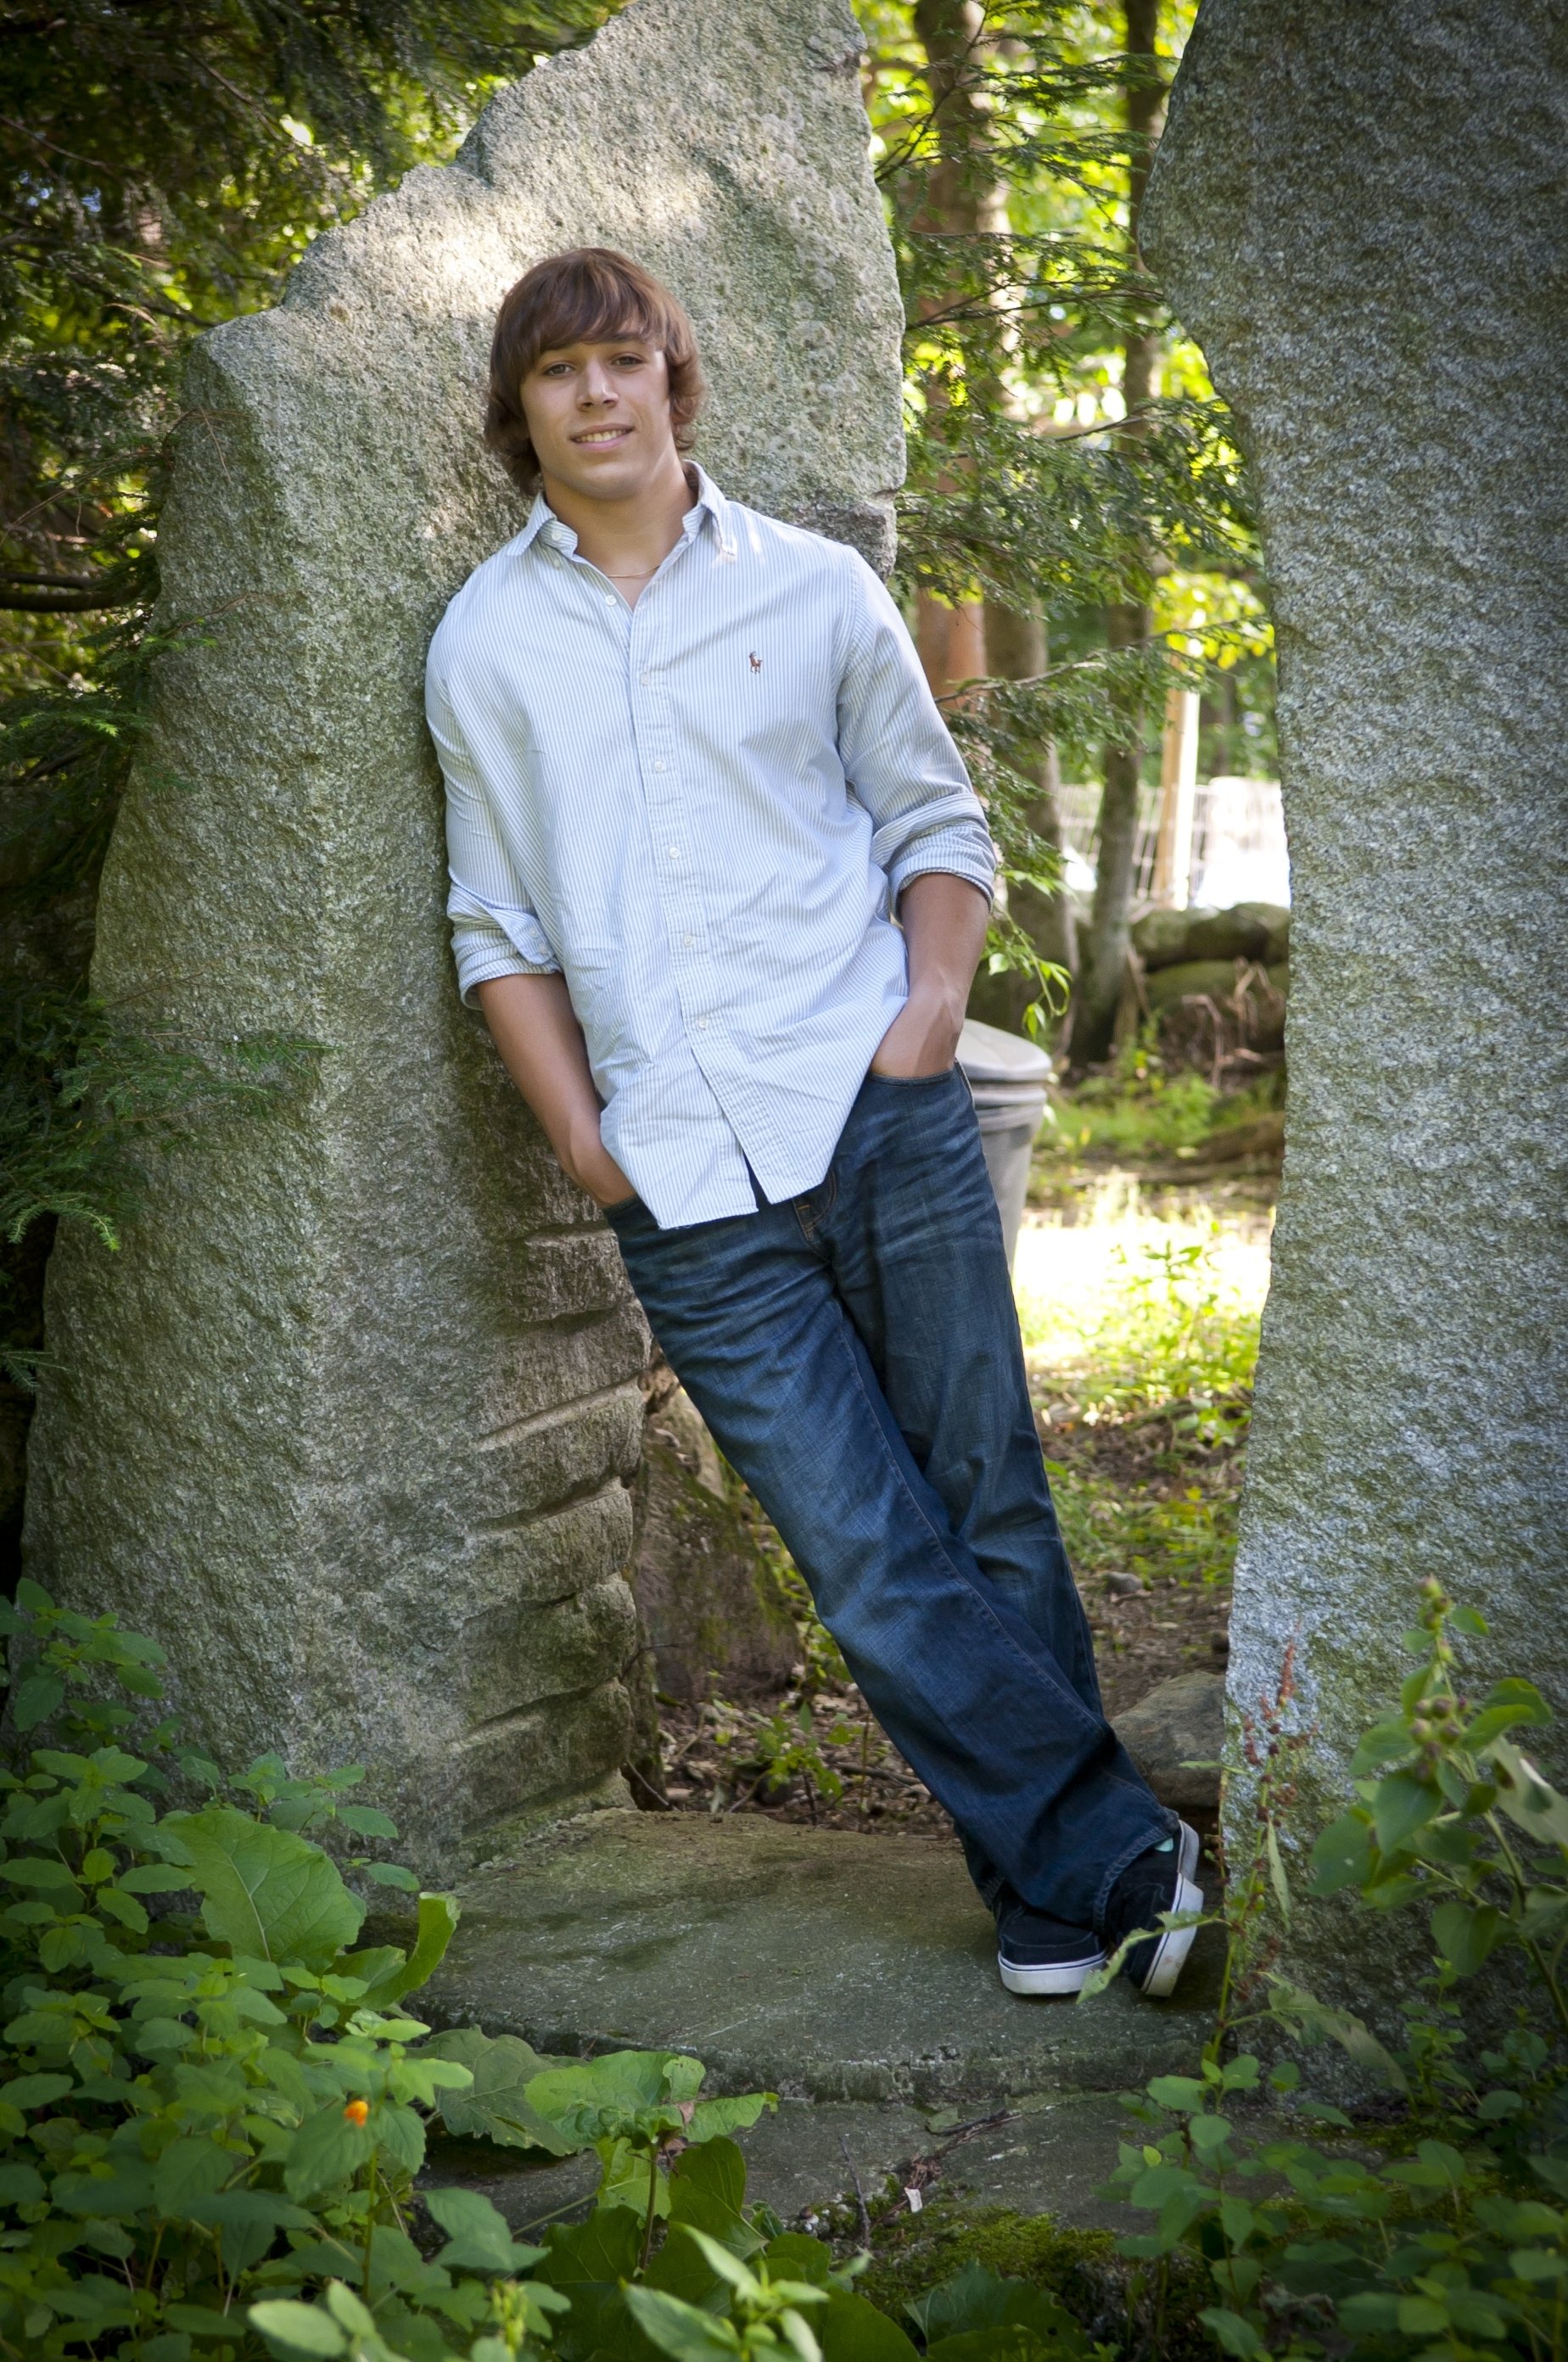 10 Most Popular Senior Picture Ideas For Boys great casual pose between trees or concrete walls for a city look 2022